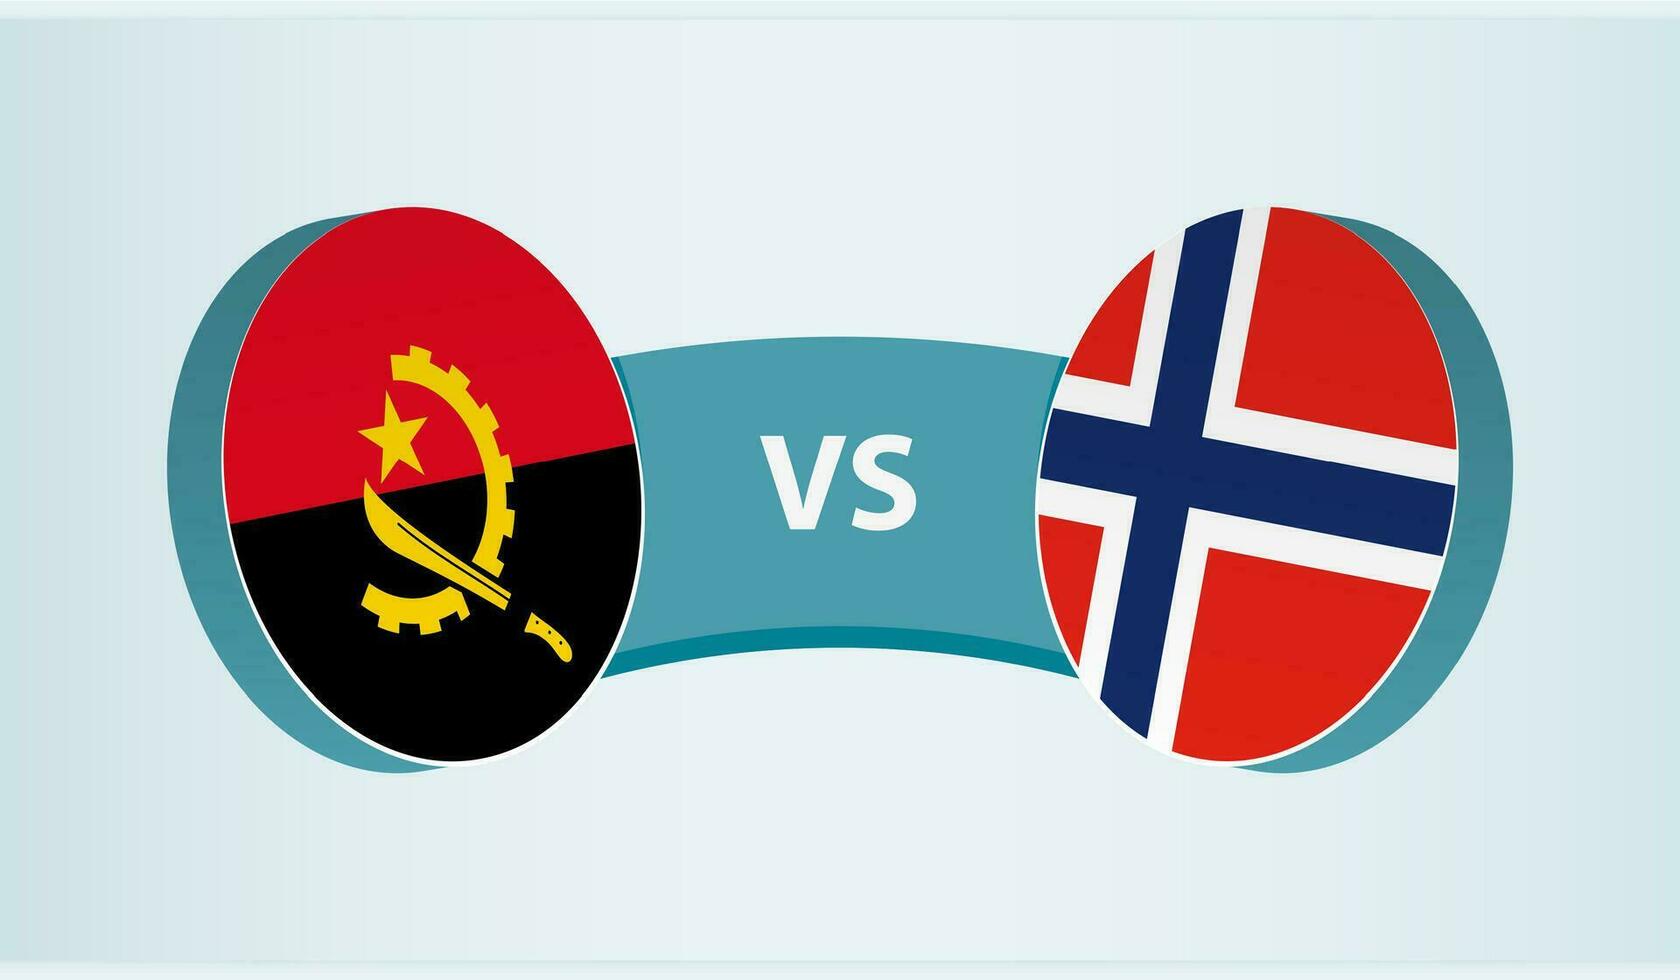 Angola versus Norway, team sports competition concept. vector